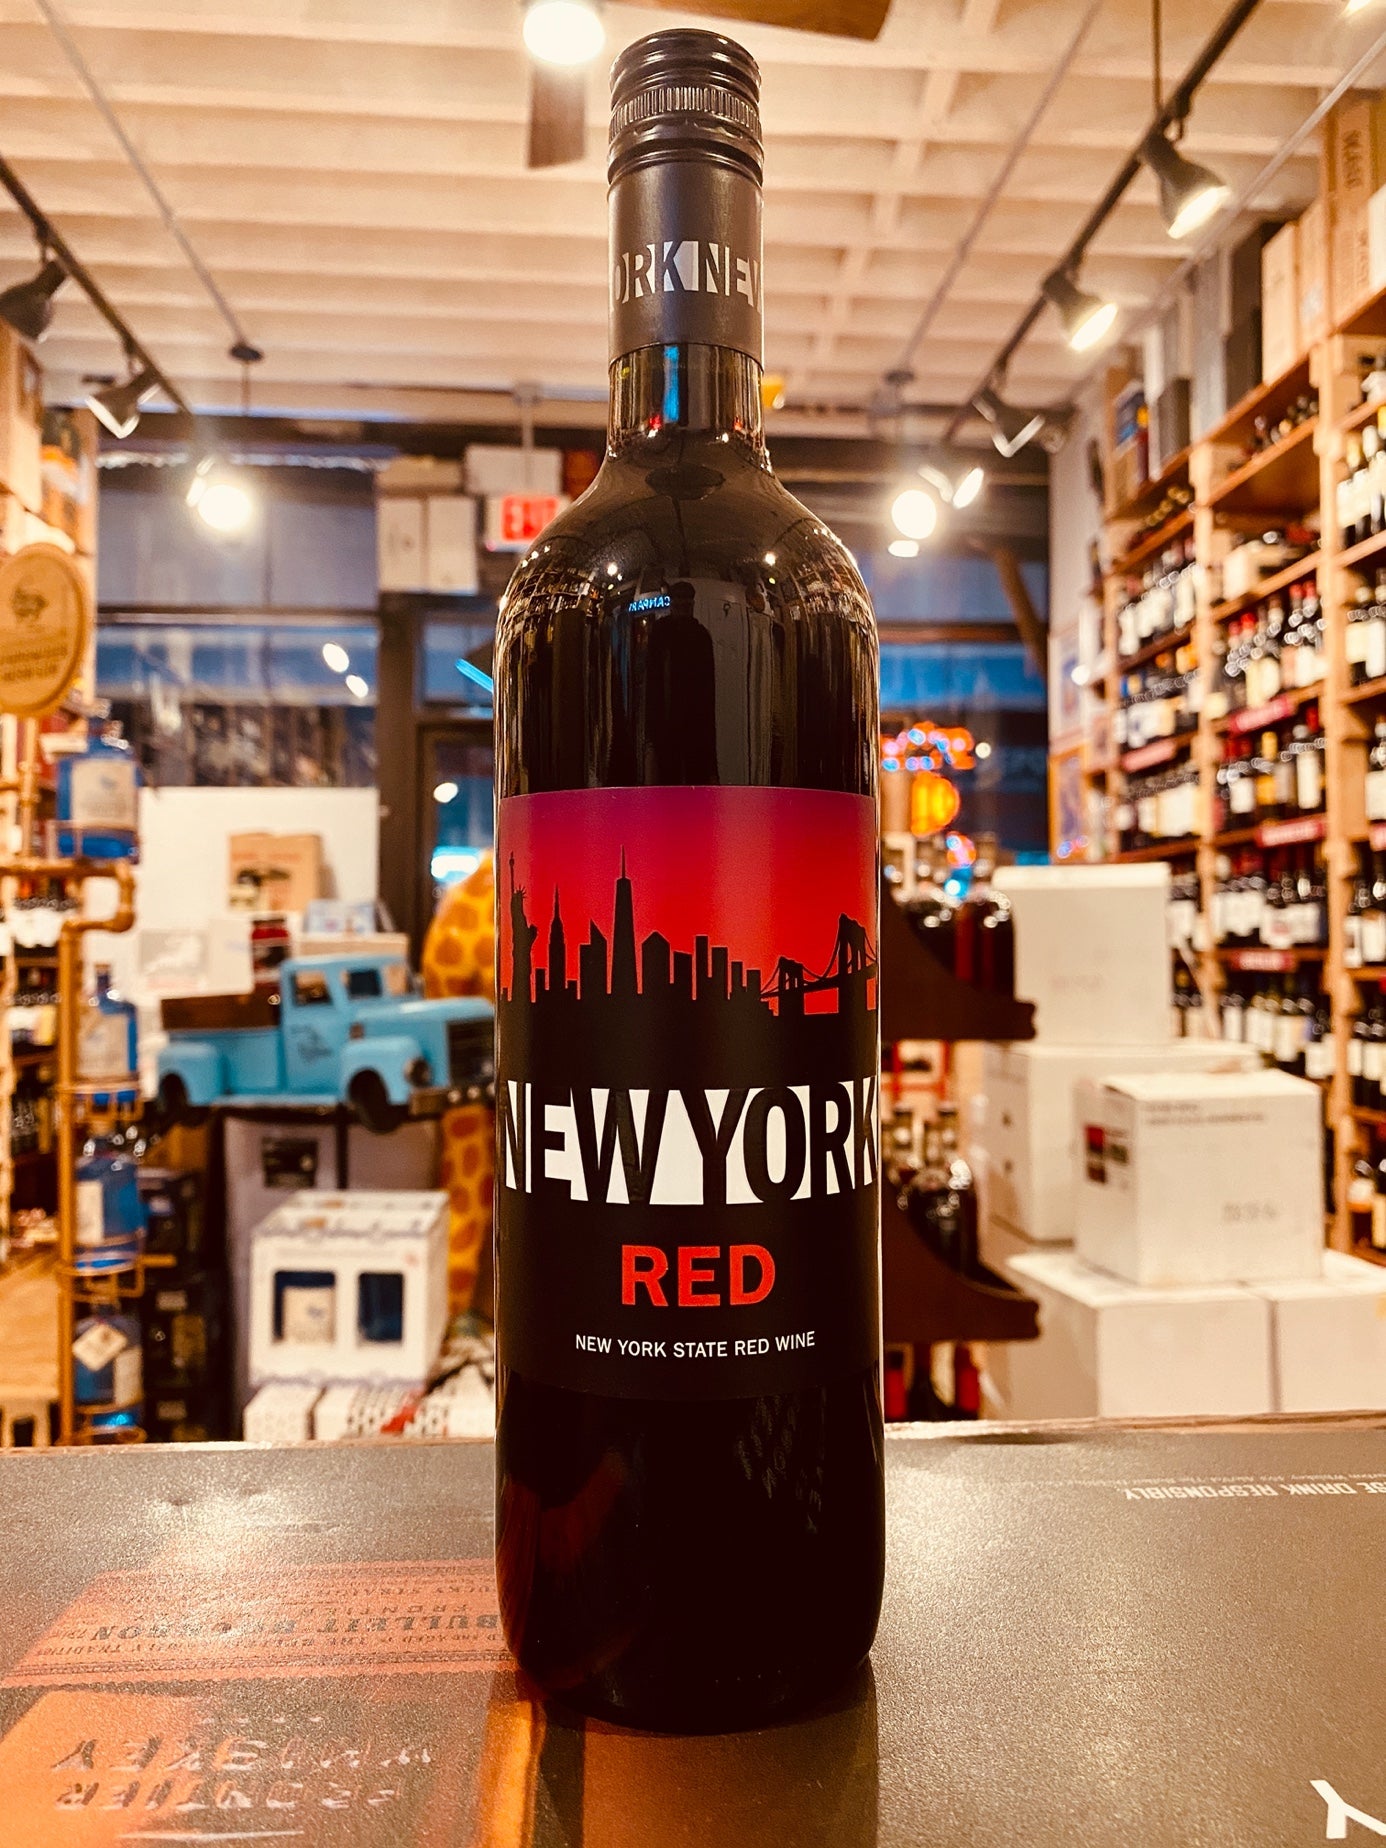 New York Red 750 mL a dark glass wine bottle with a red and black label with the image of the New York skyline on it.